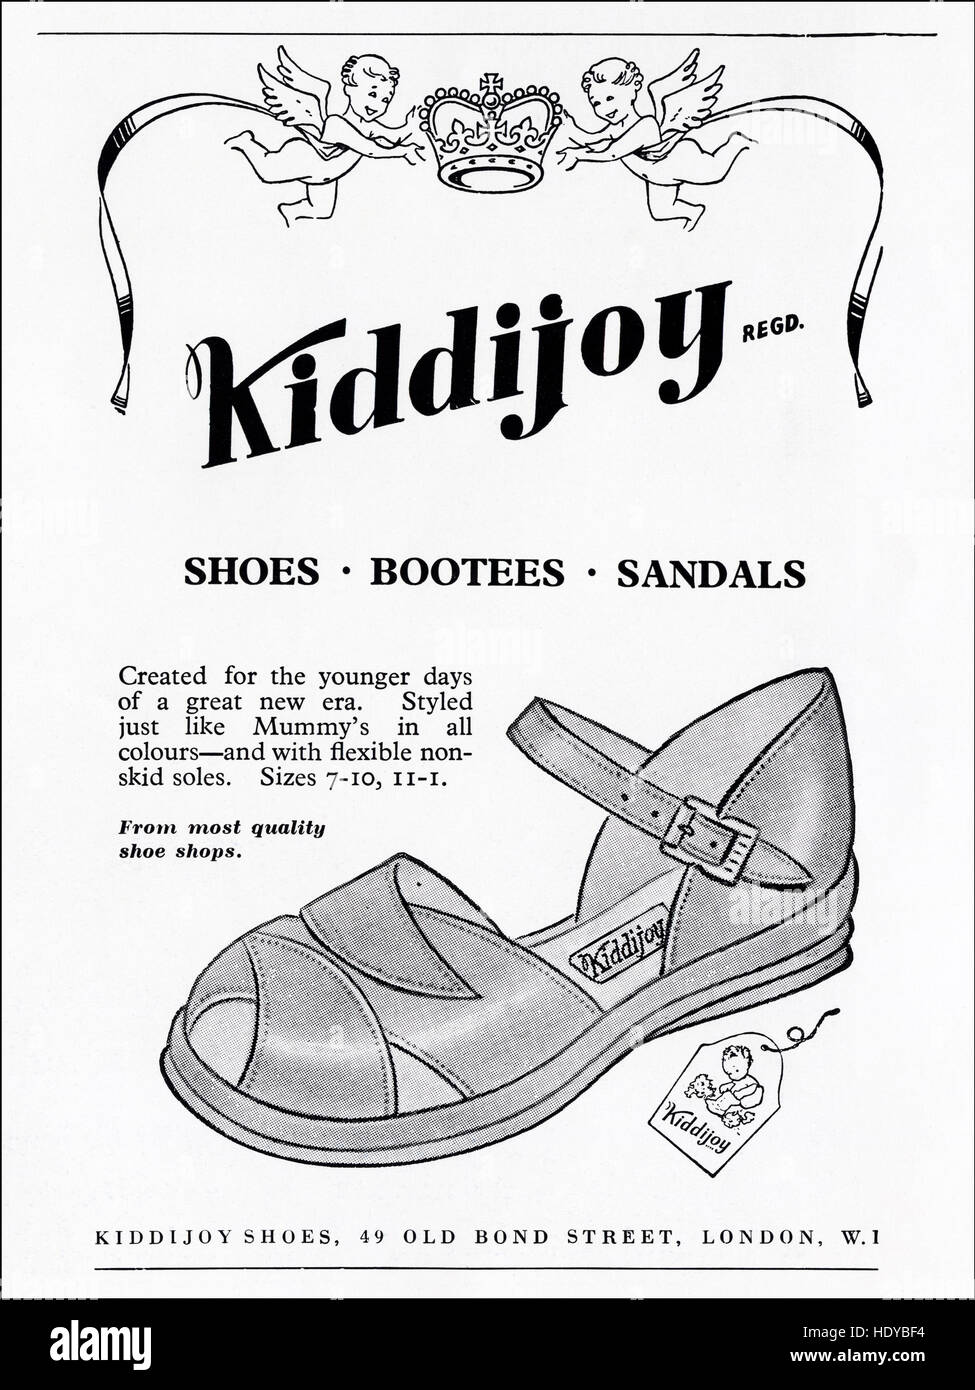 1950s advert advertising from original old vintage English 50s magazine  dated 1953 advertisement for Kiddijoy shoes bootees & sandals of London  Stock Photo - Alamy